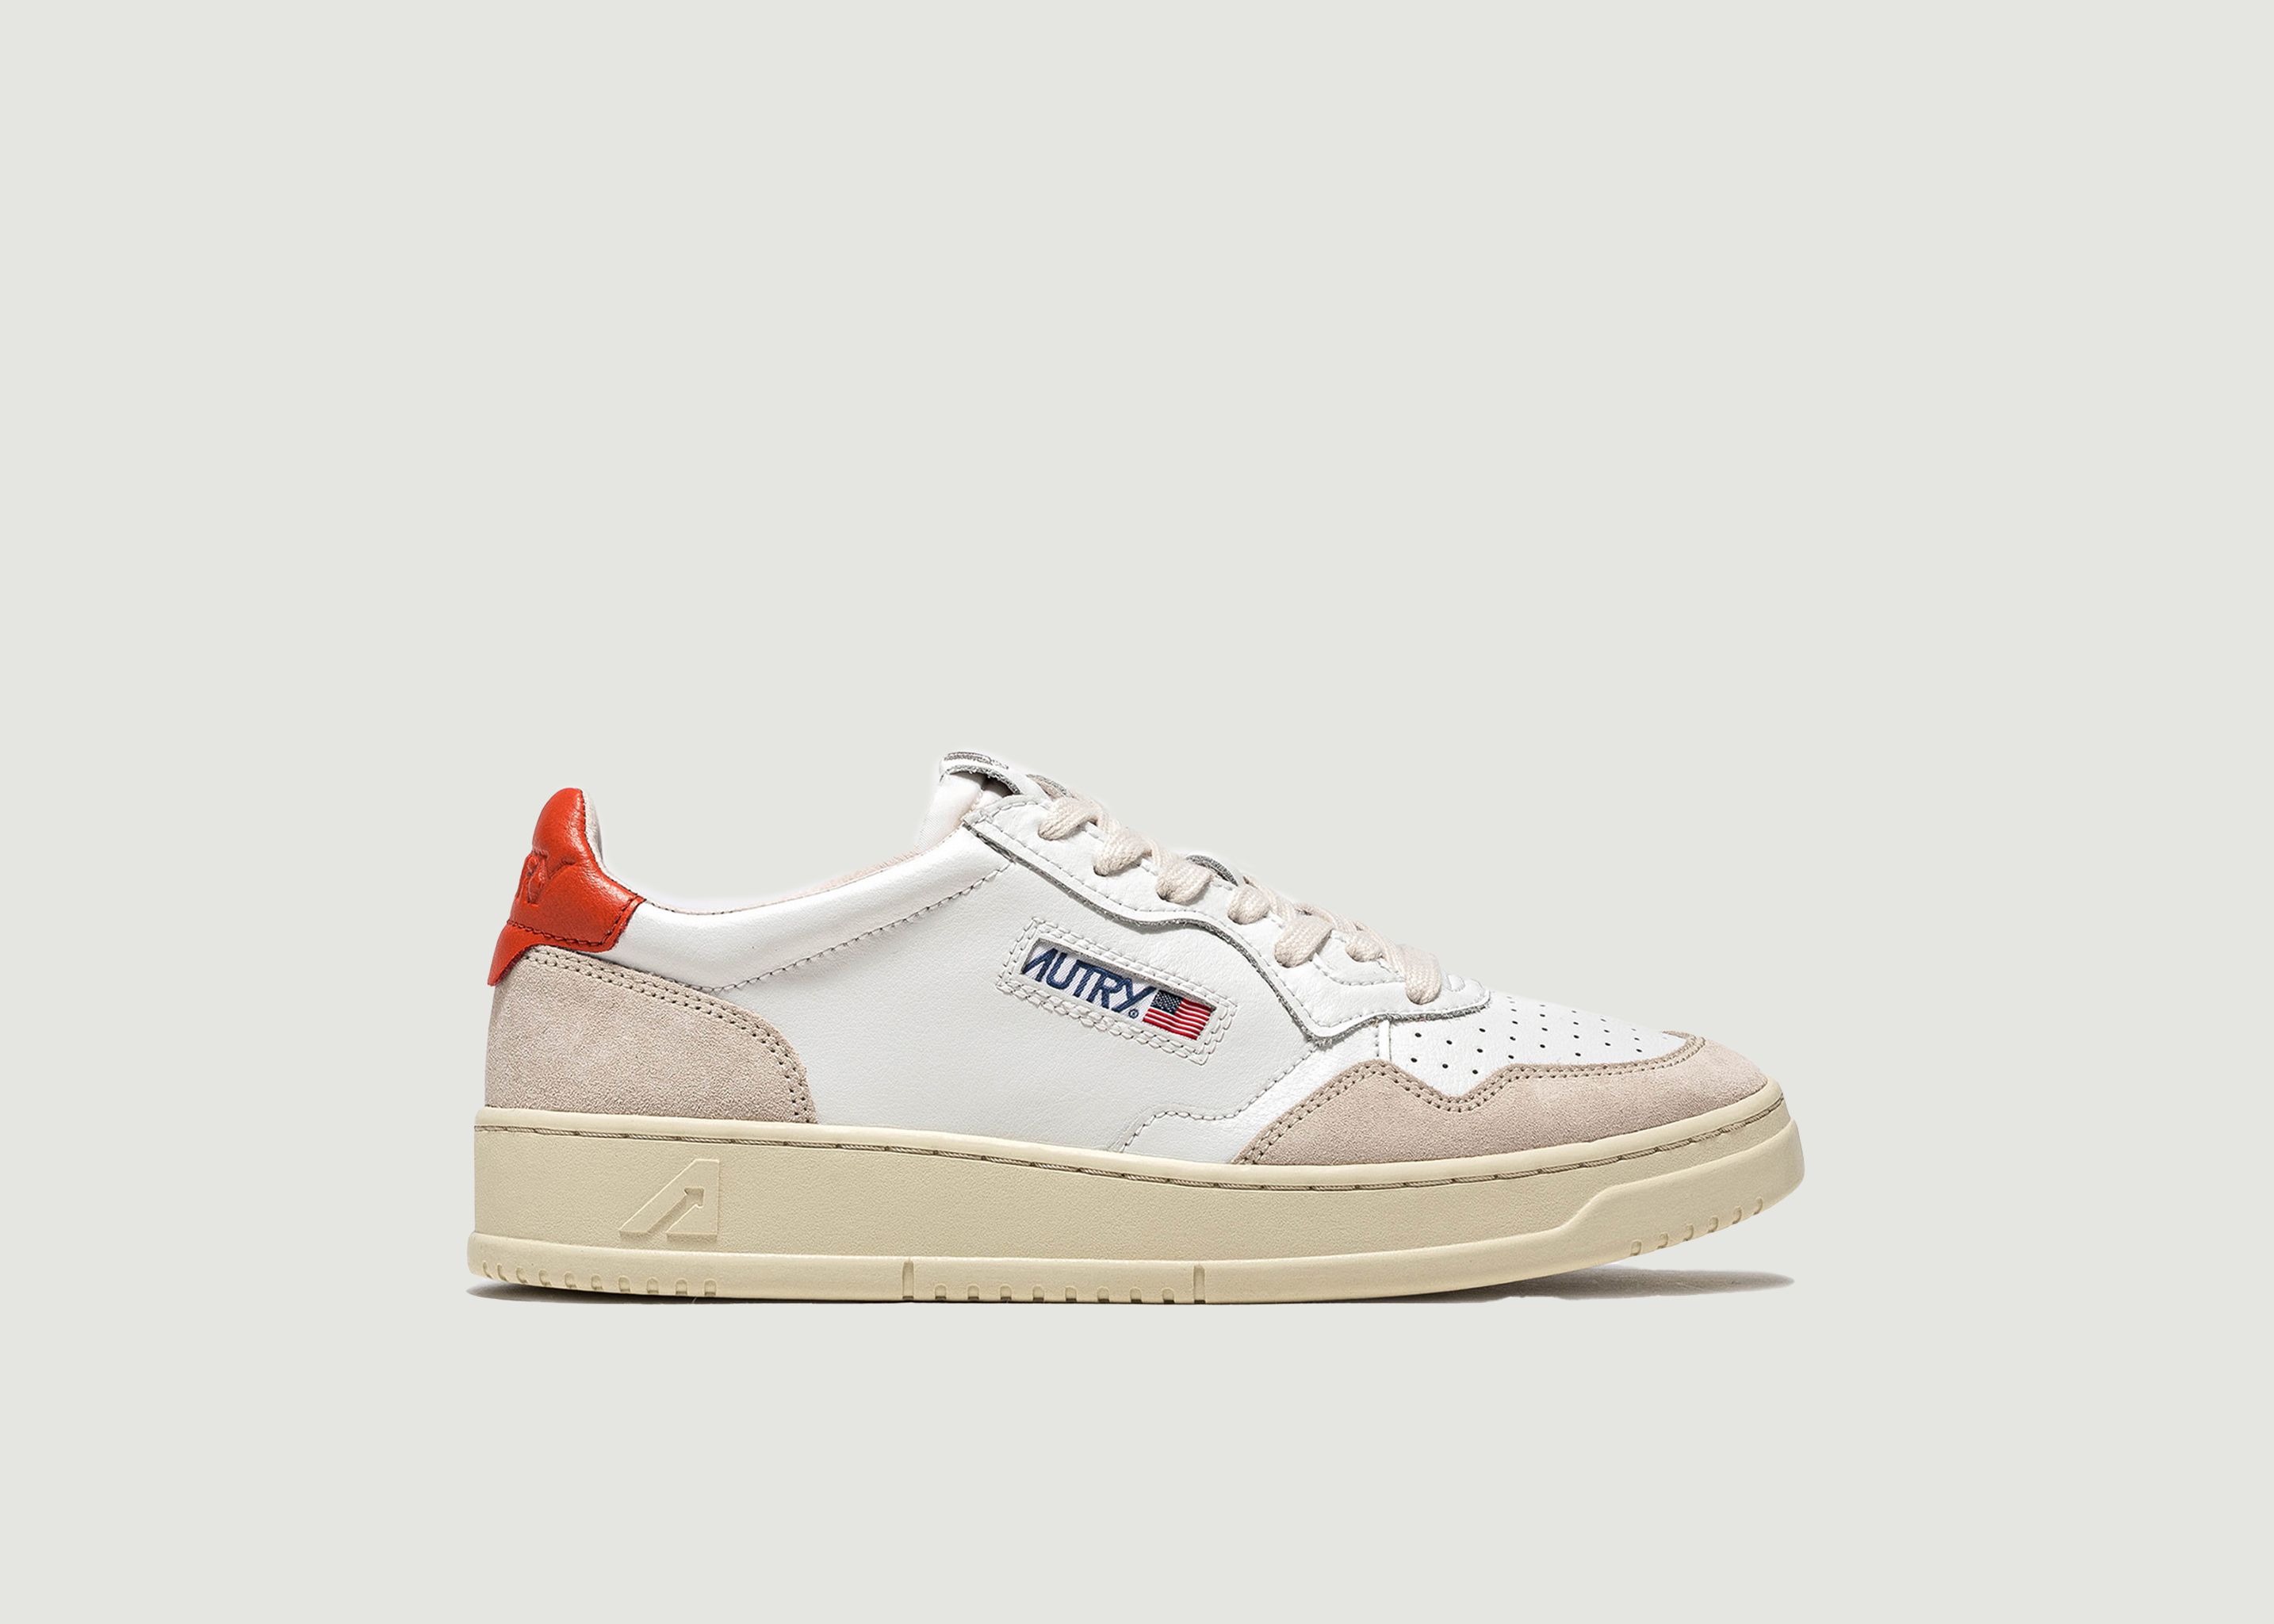 Medalist Low sneakers in orange and white leather - AUTRY